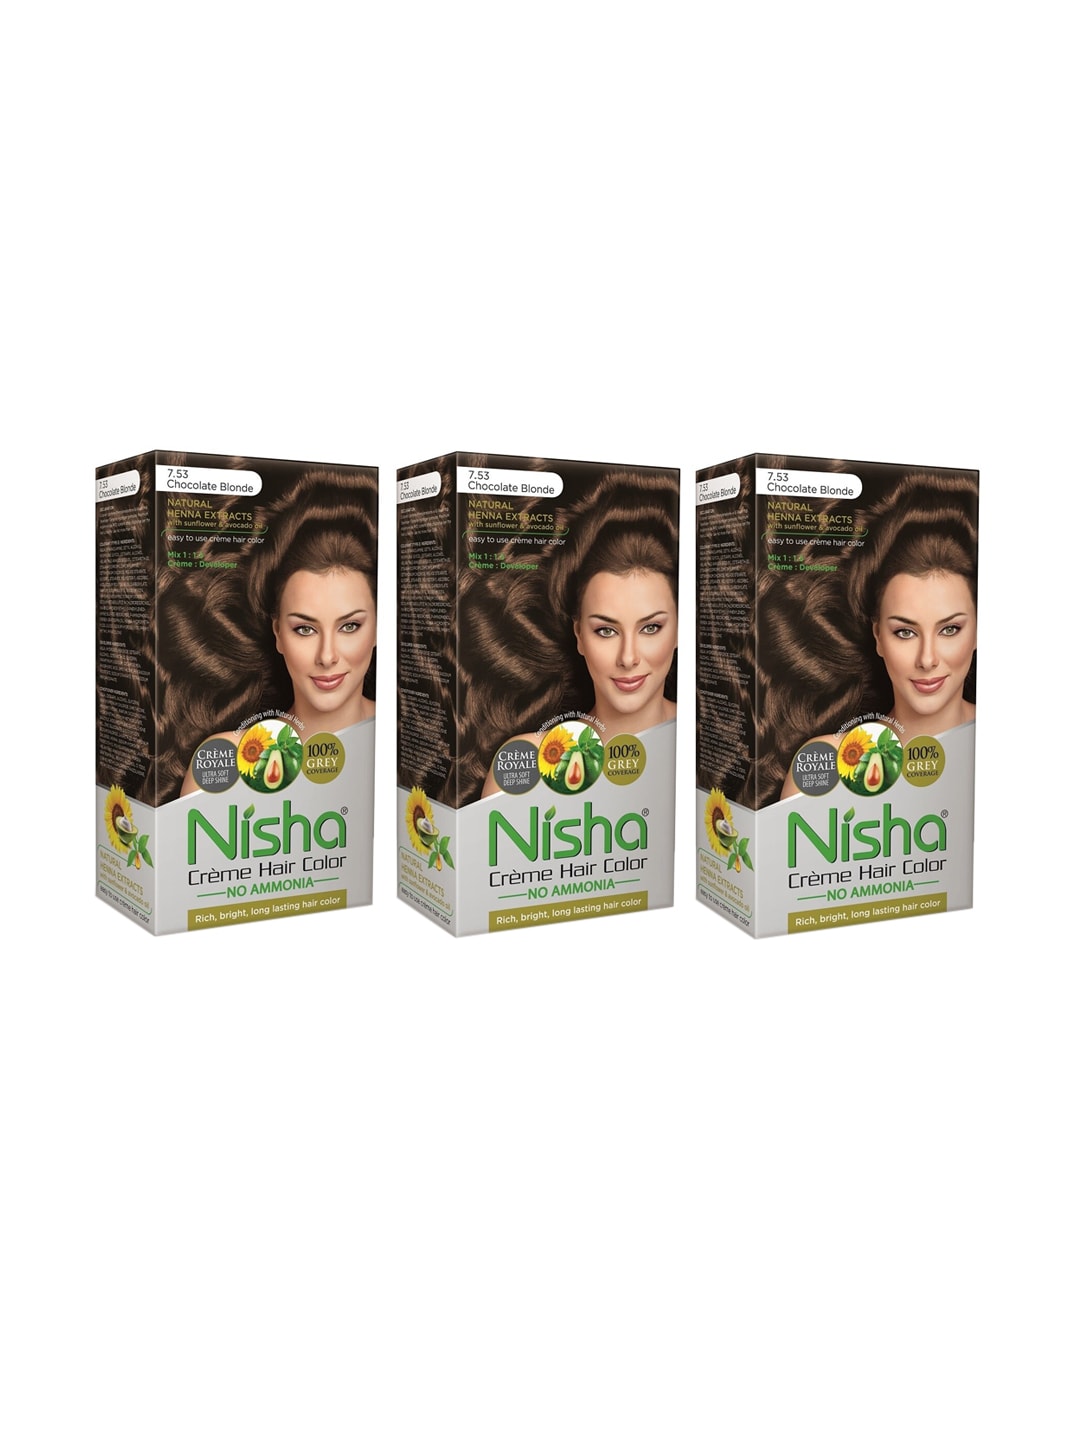 Nisha Unisex Gold Pack of 2 Creme Hair Color 150gm each- Chocolate Blonde Price in India